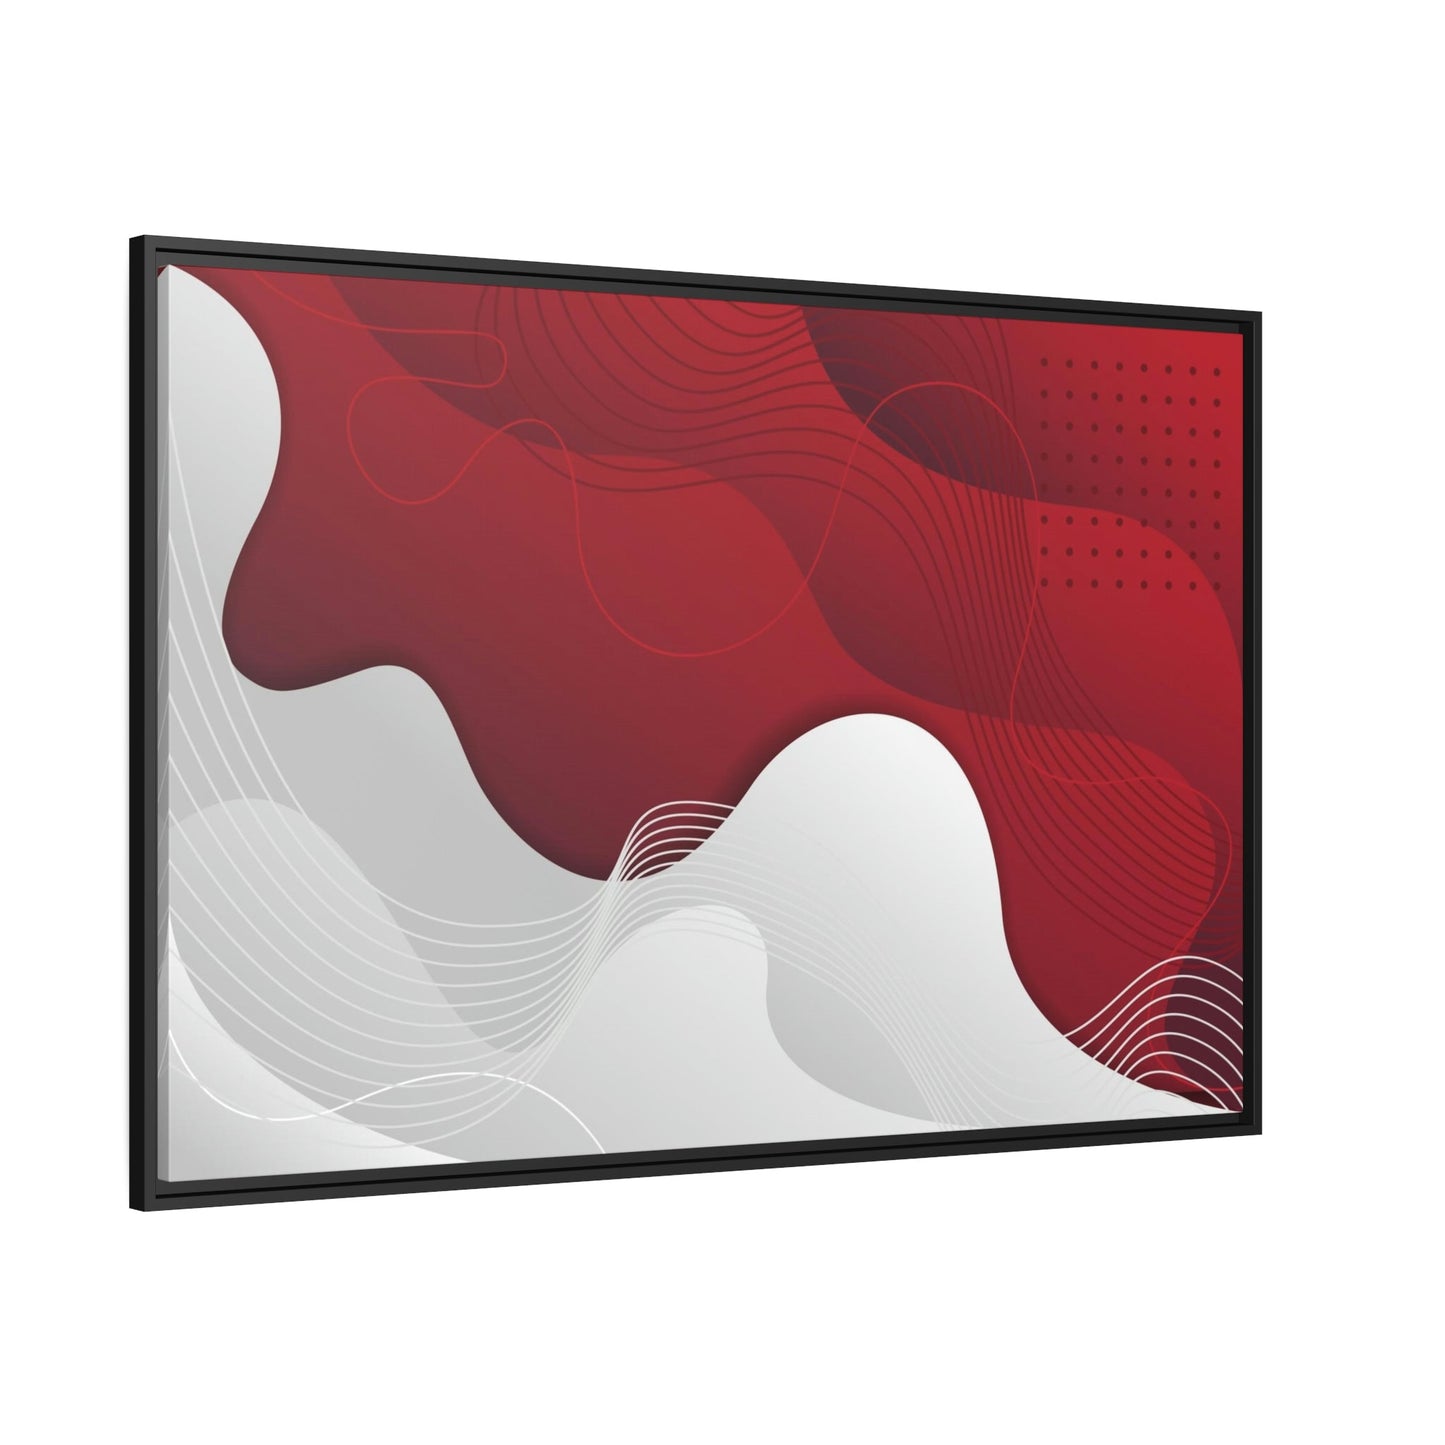 The Art of Passion: Red Abstract Art on Framed Canvas and Posters